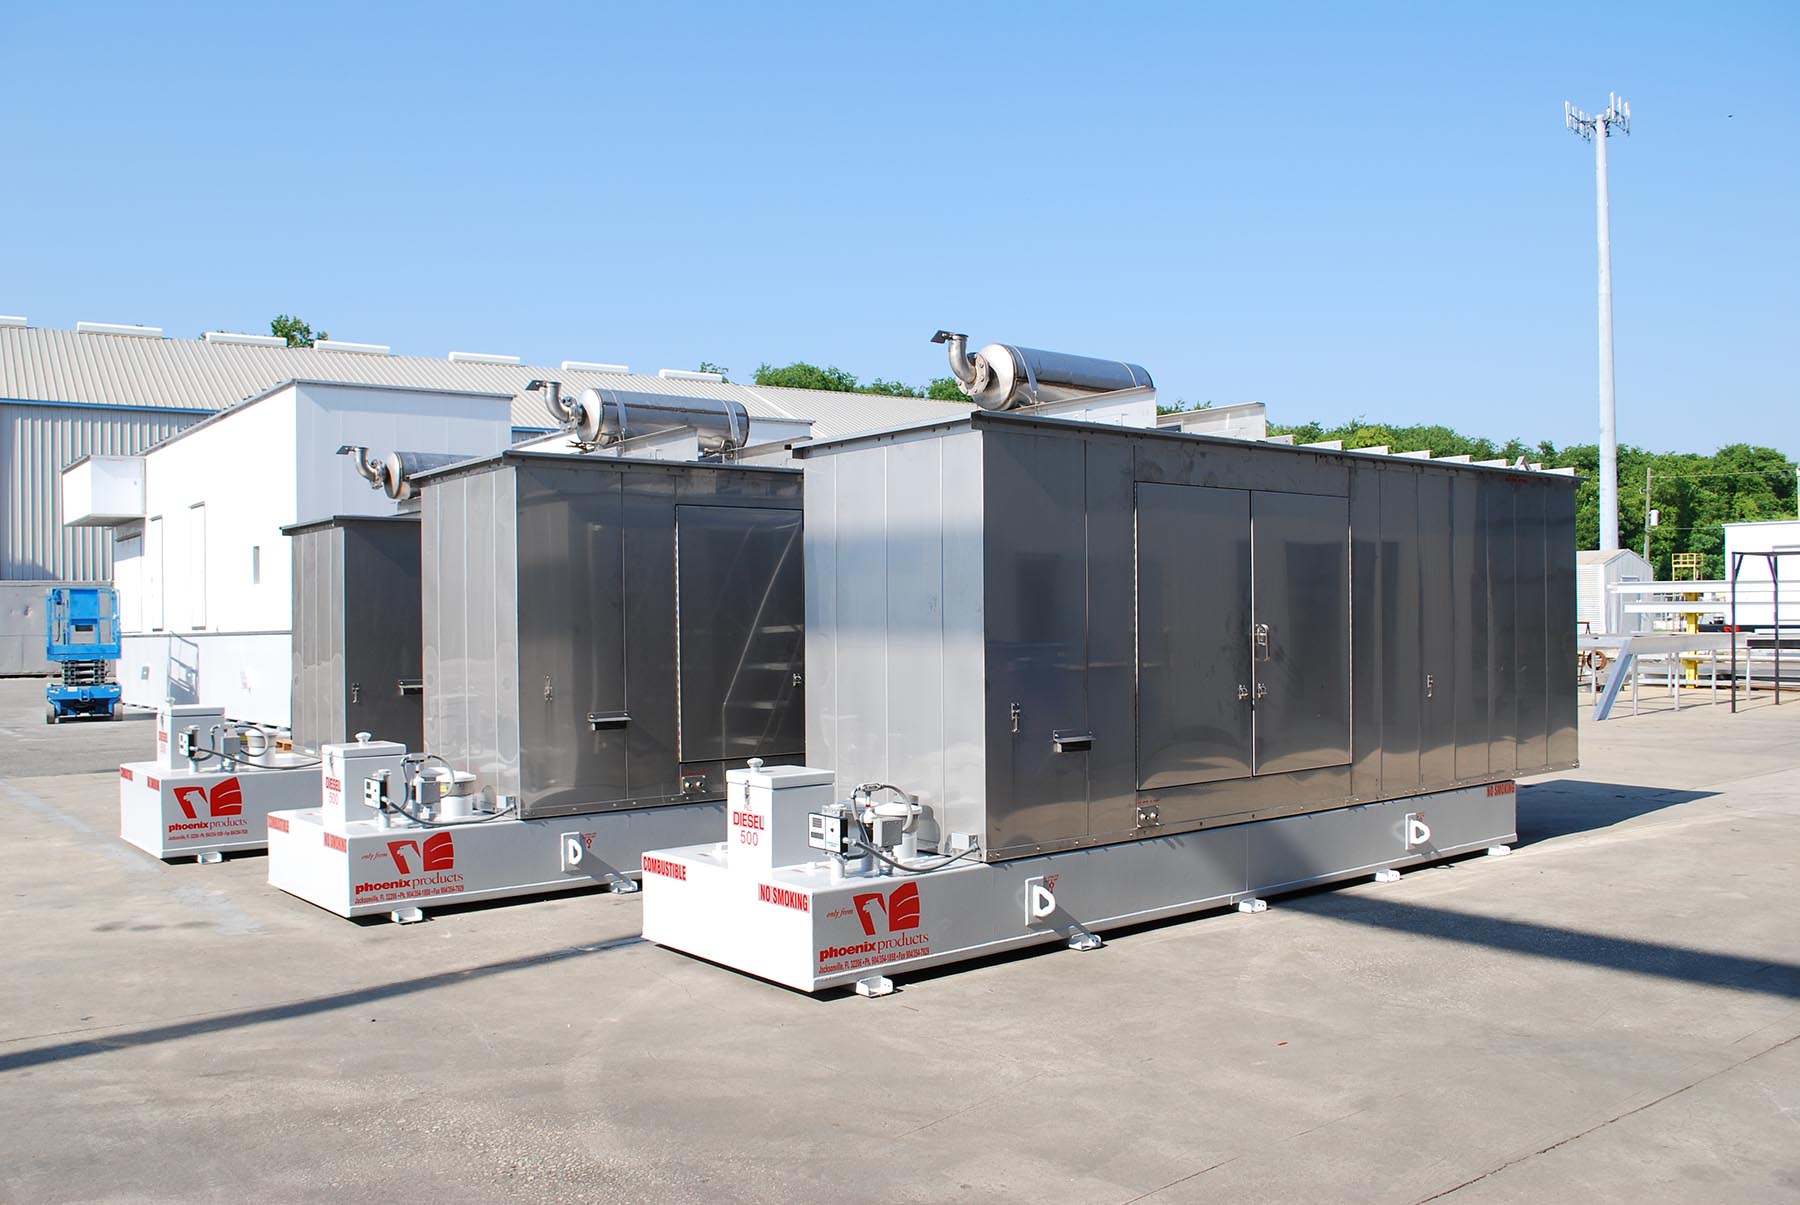 Phoenix-Products-Three-Custom-Stainless-Steel-Generator-Enclosures-With-UL-Sub-Base-Fuel-Tanks